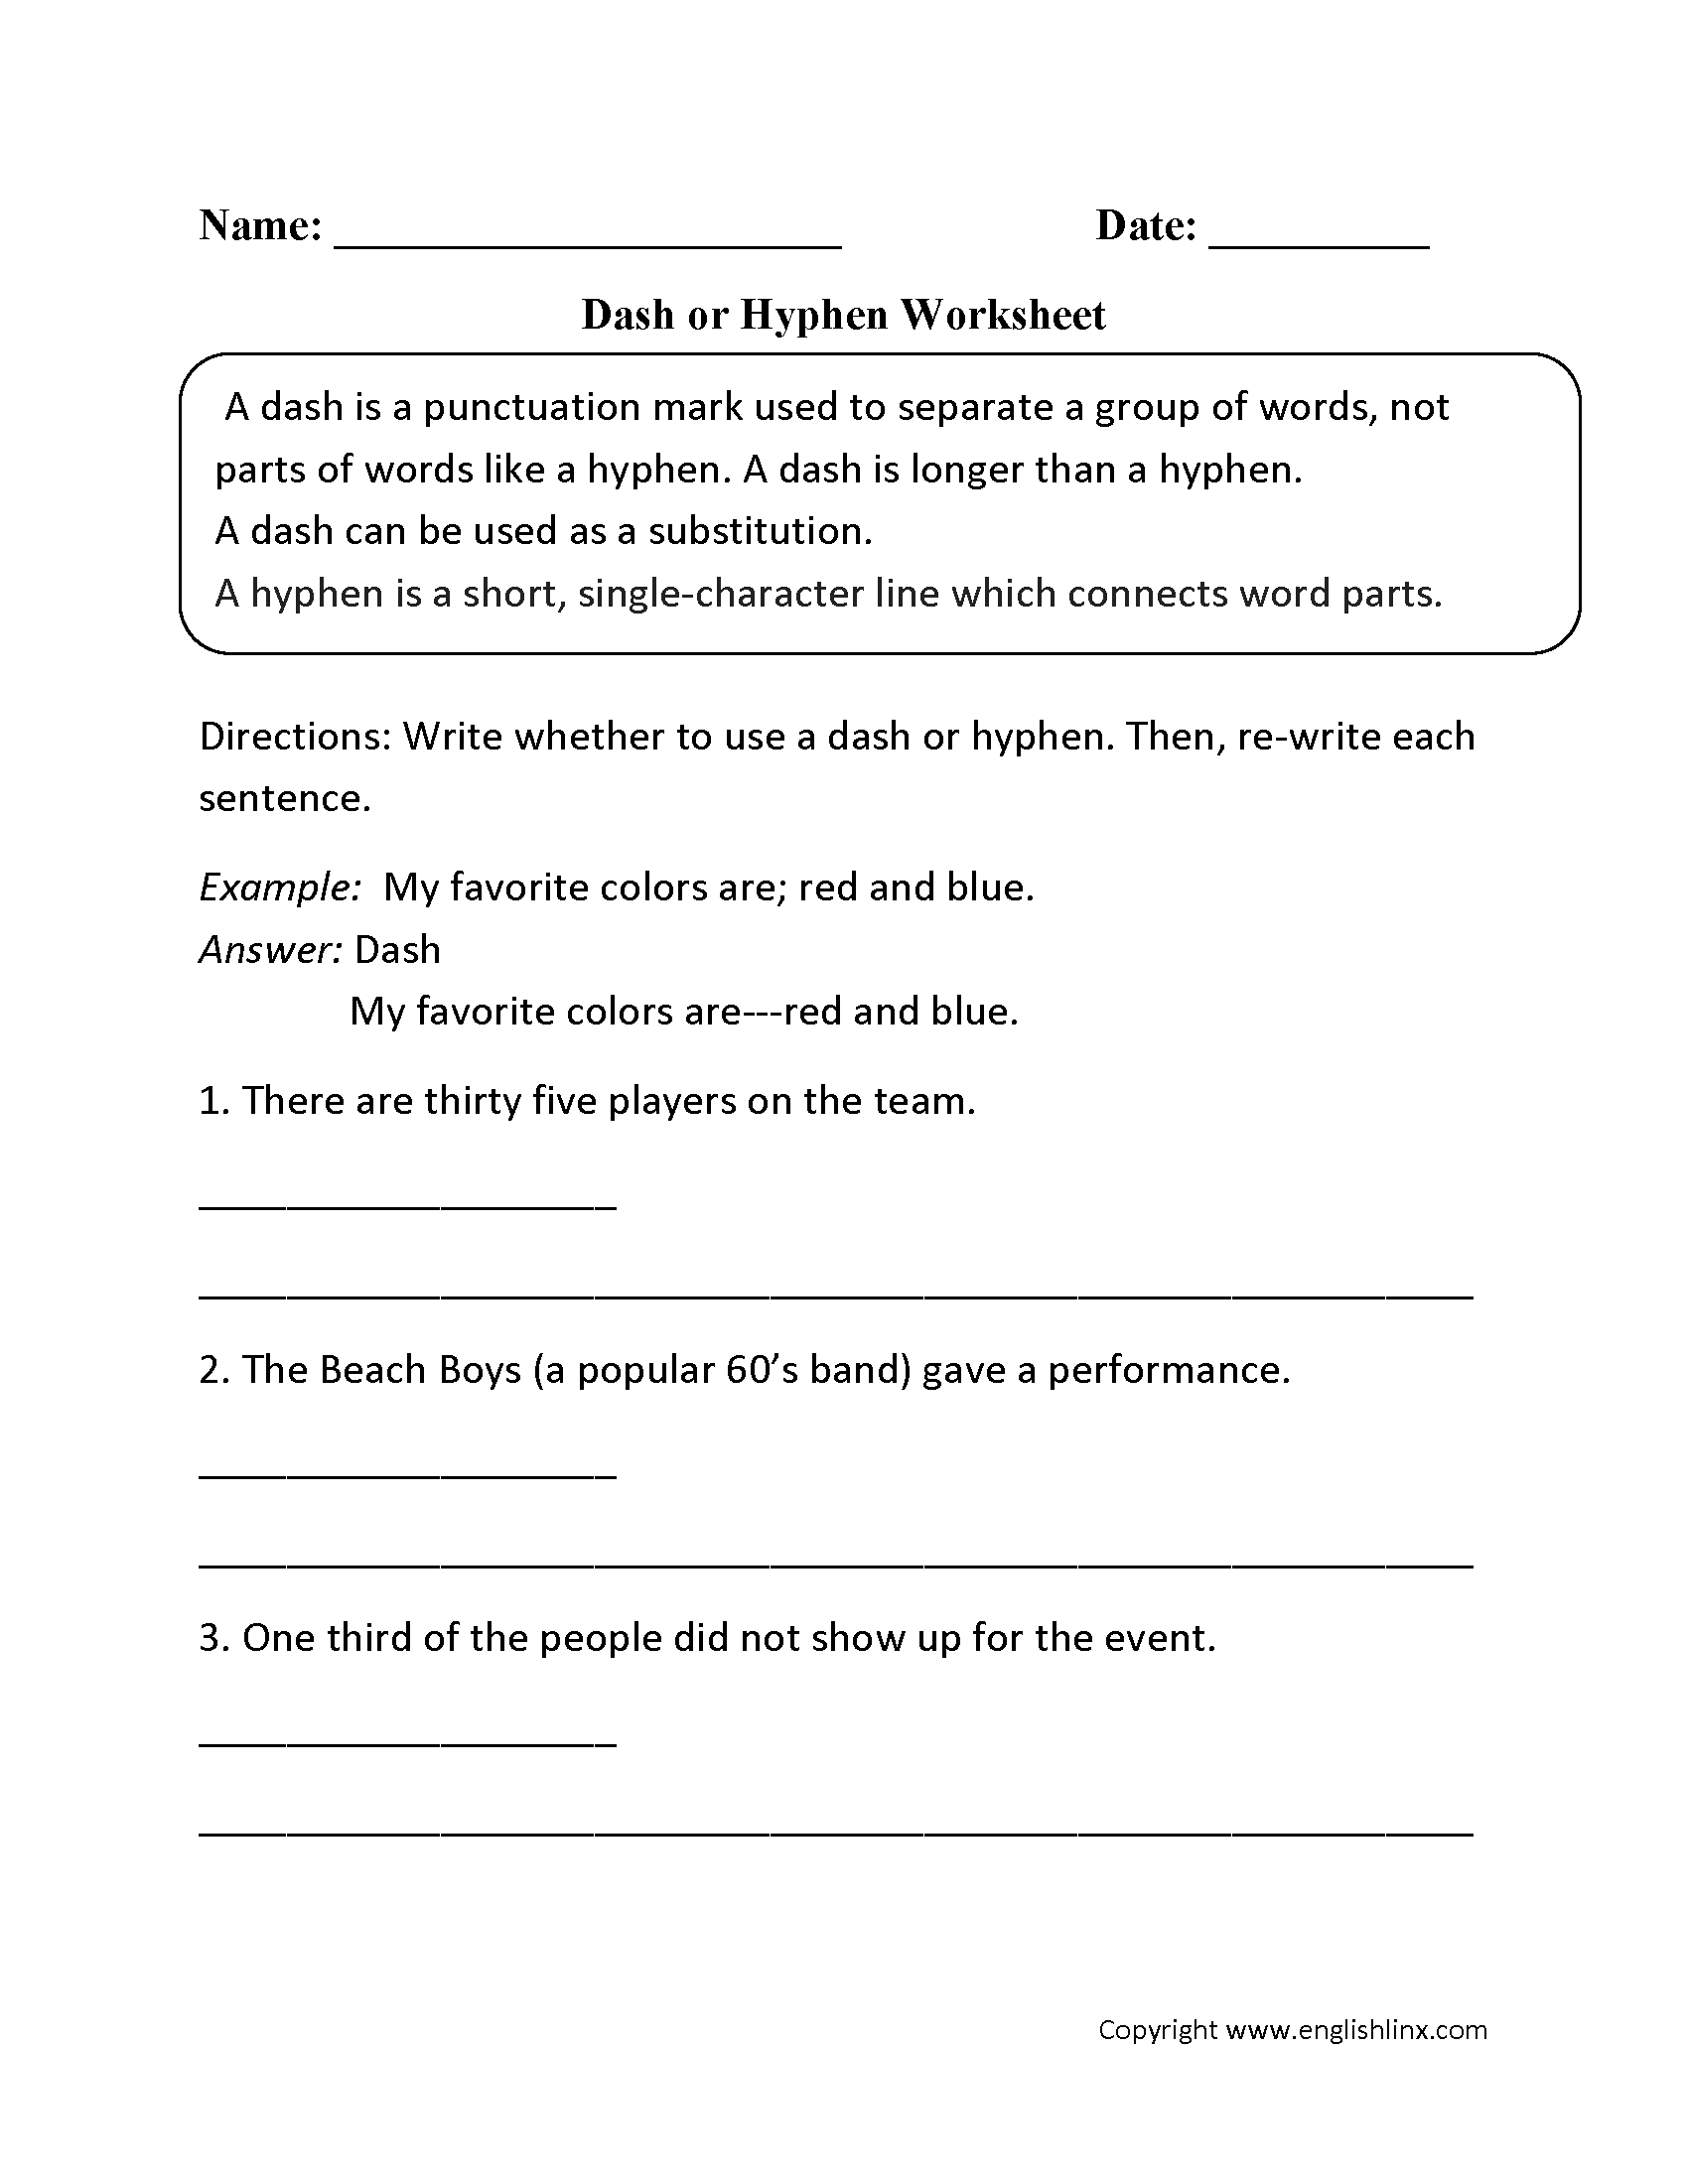 hyphens-and-dashes-worksheet